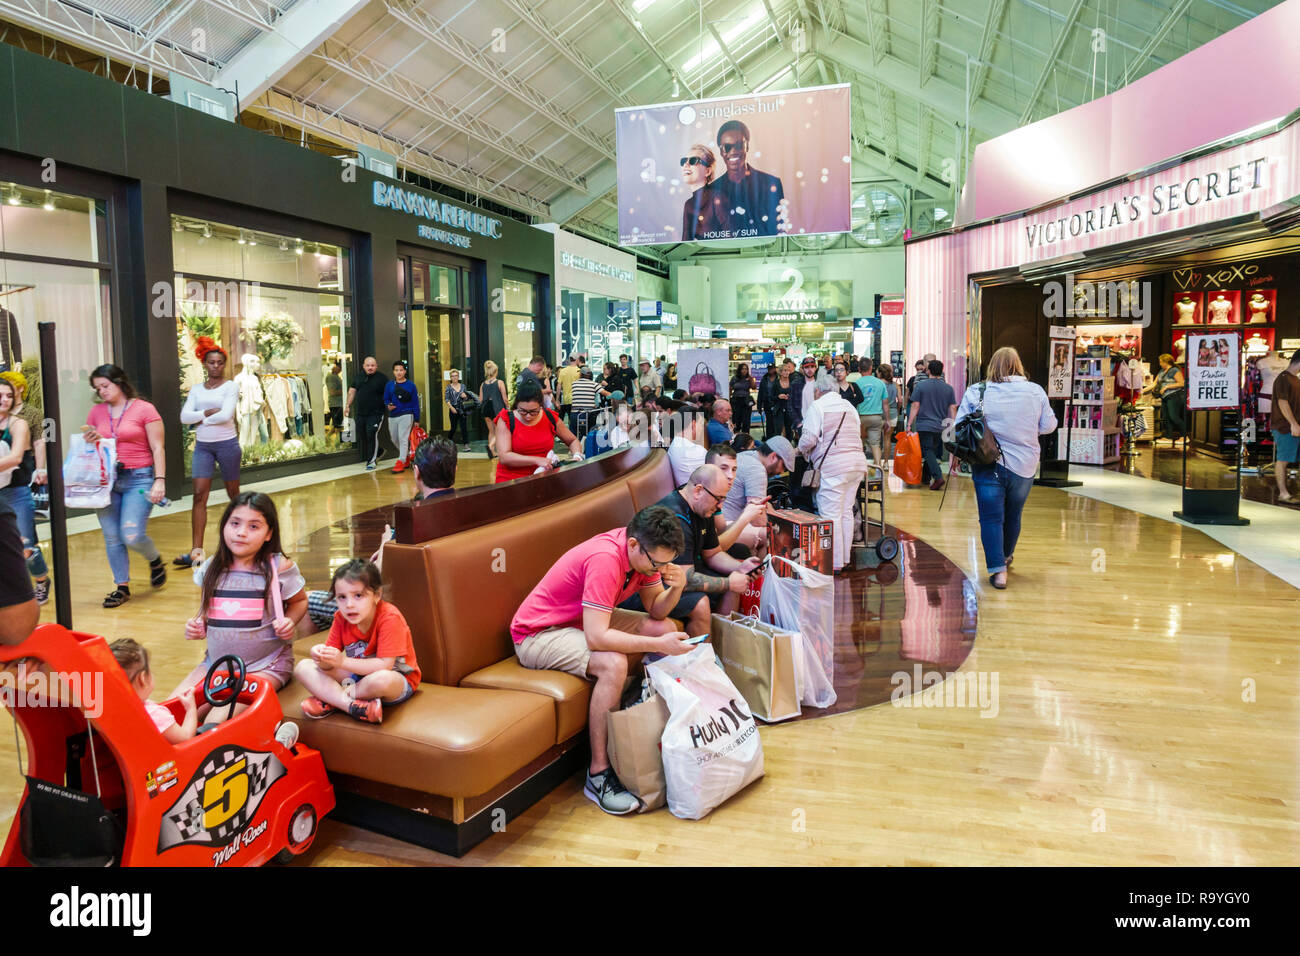 112 Sawgrass Mills Mall Images, Stock Photos, 3D objects